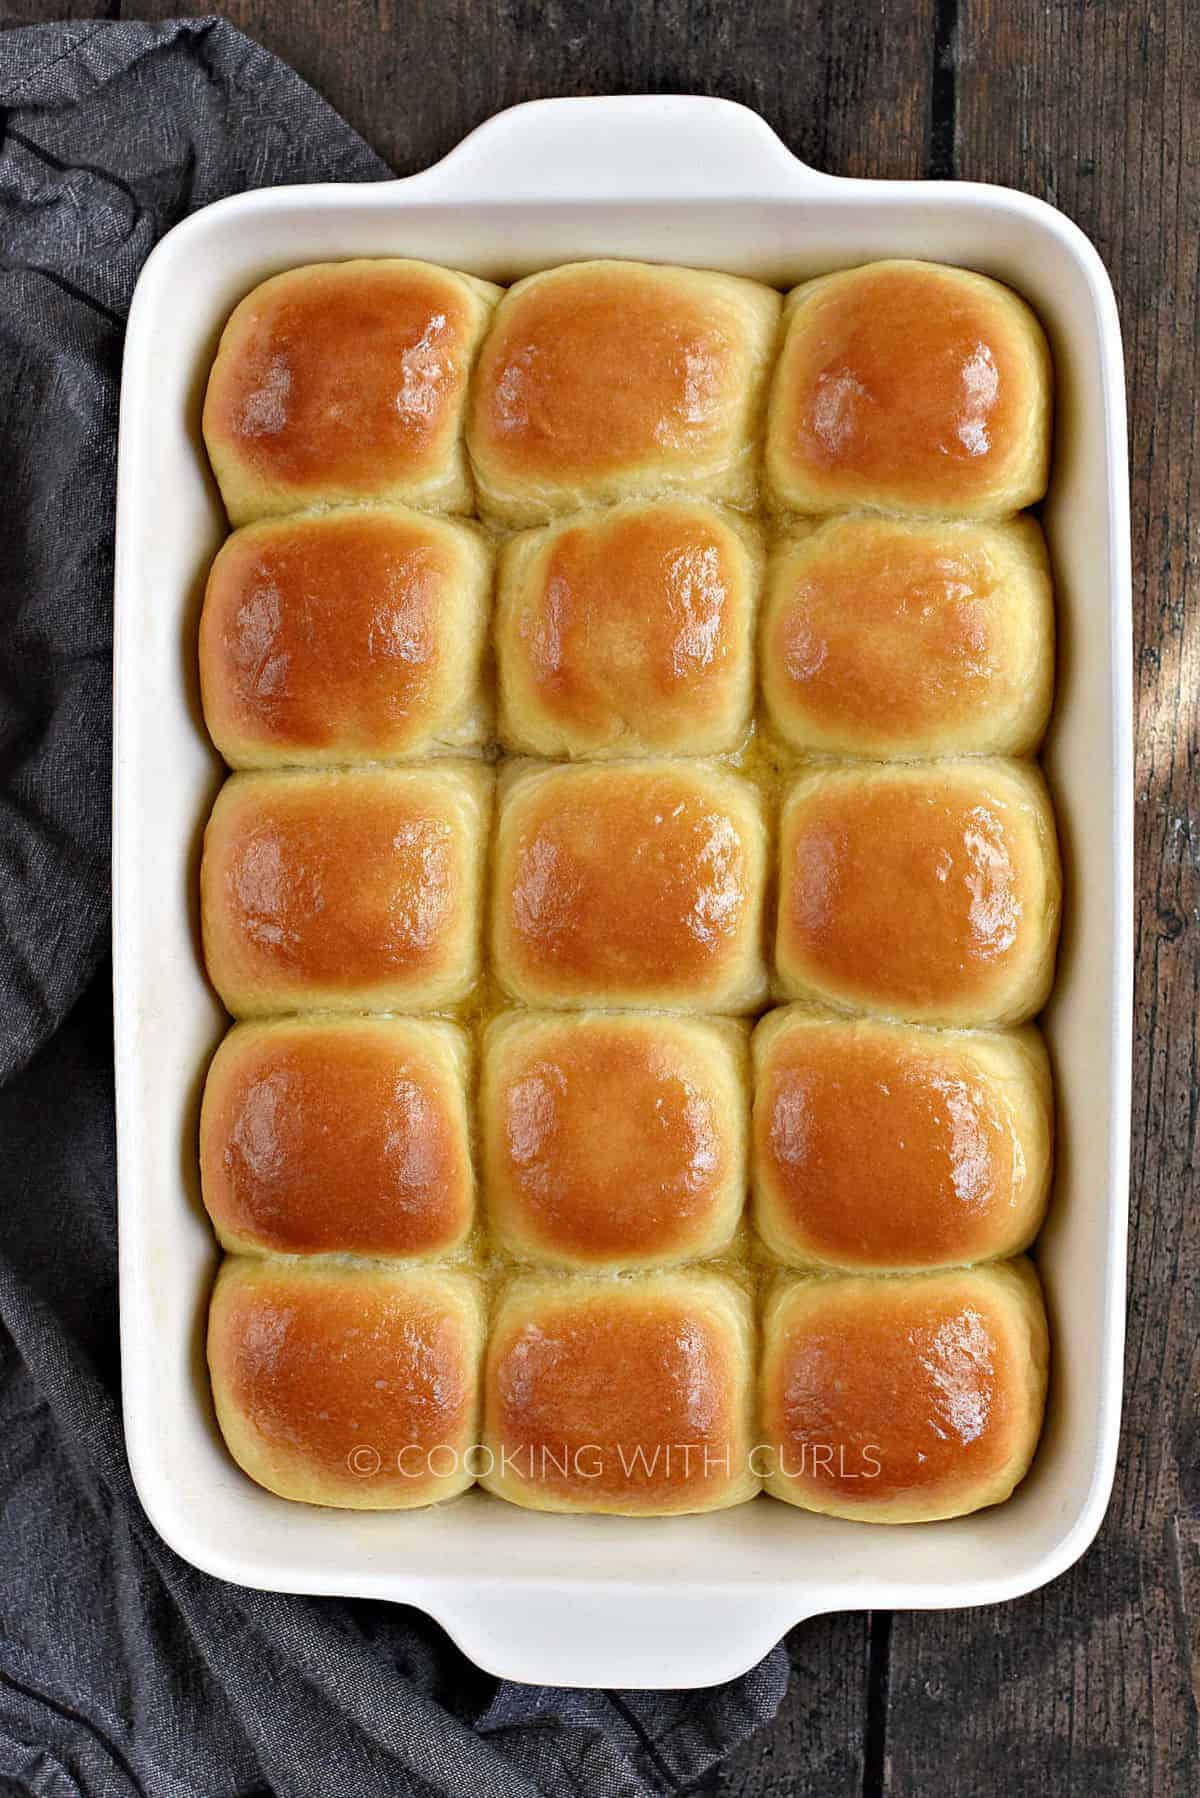 Looking down on 15 butter-topped dinner rolls in a white baking pan.